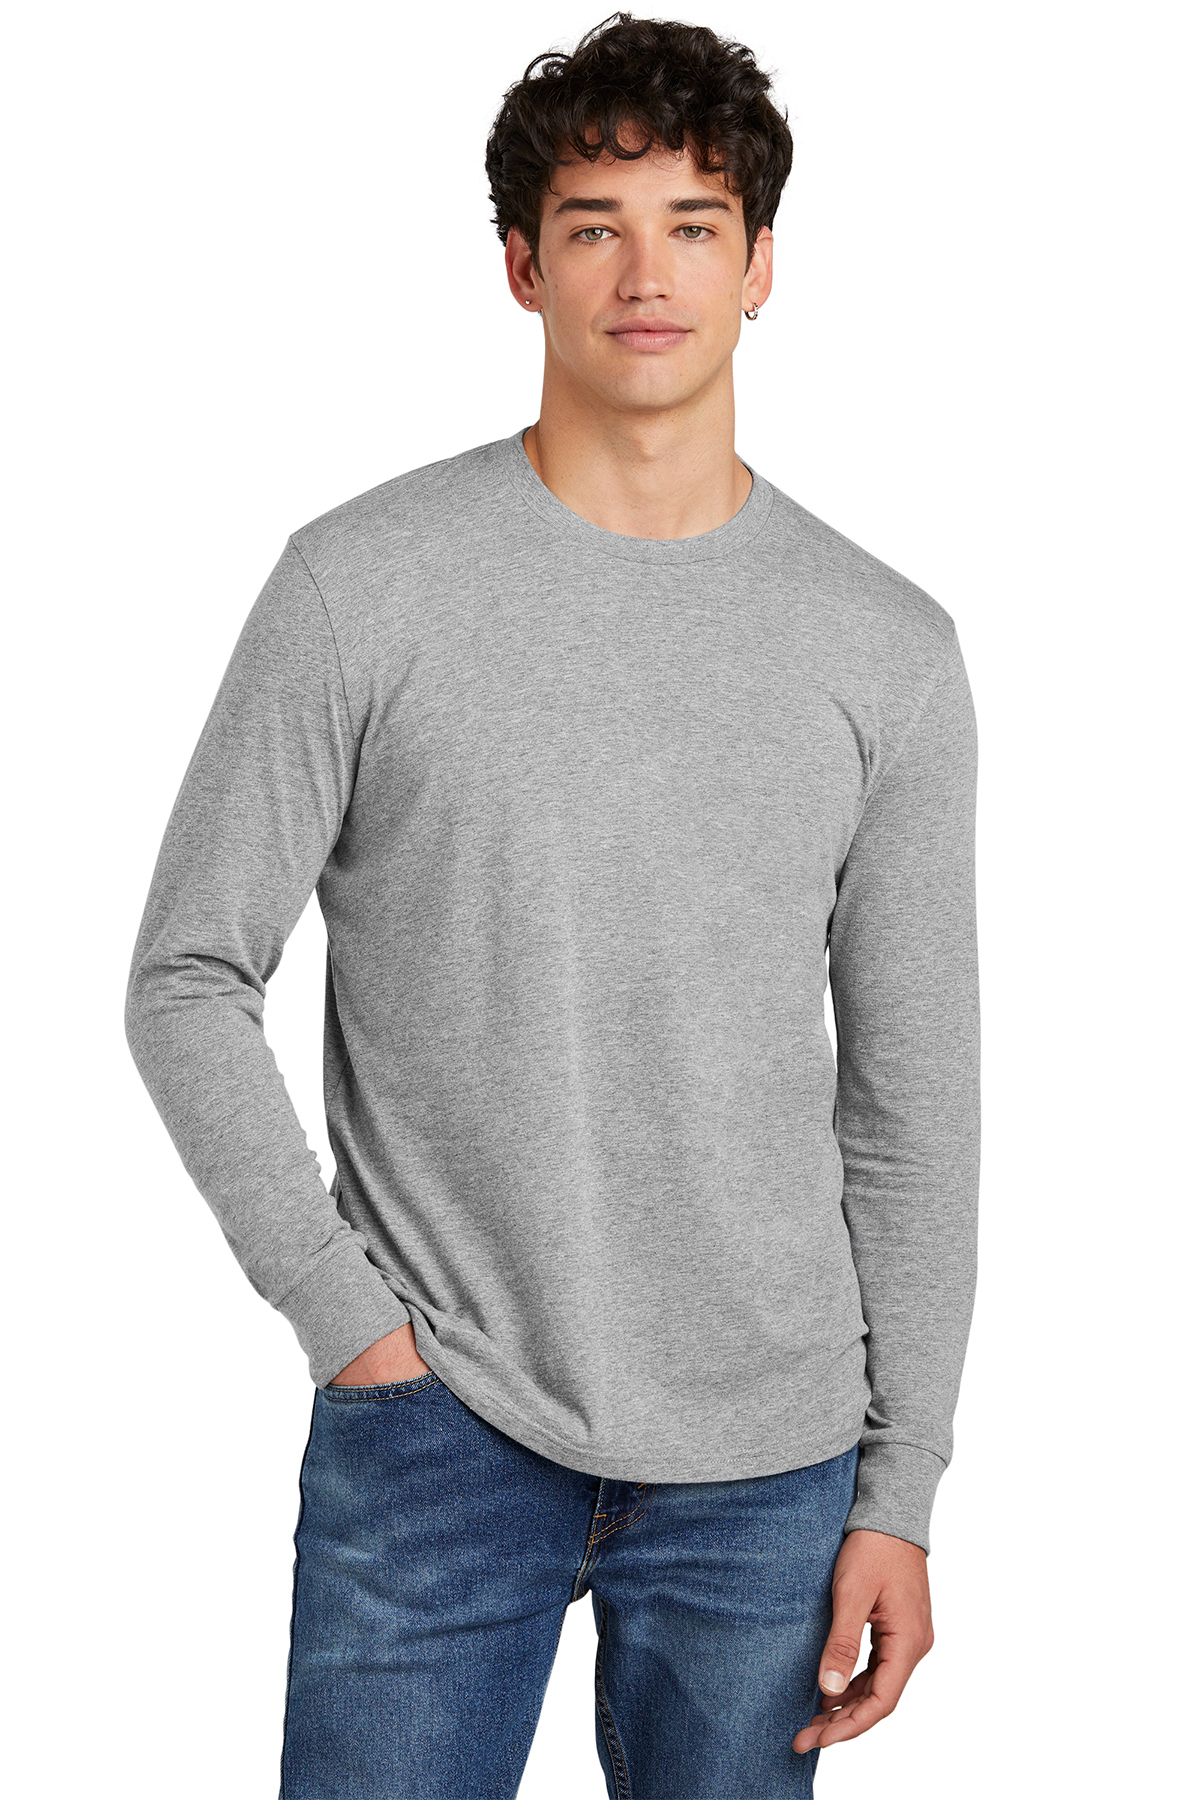 District Perfect Blend CVC Long Sleeve Tee, Product